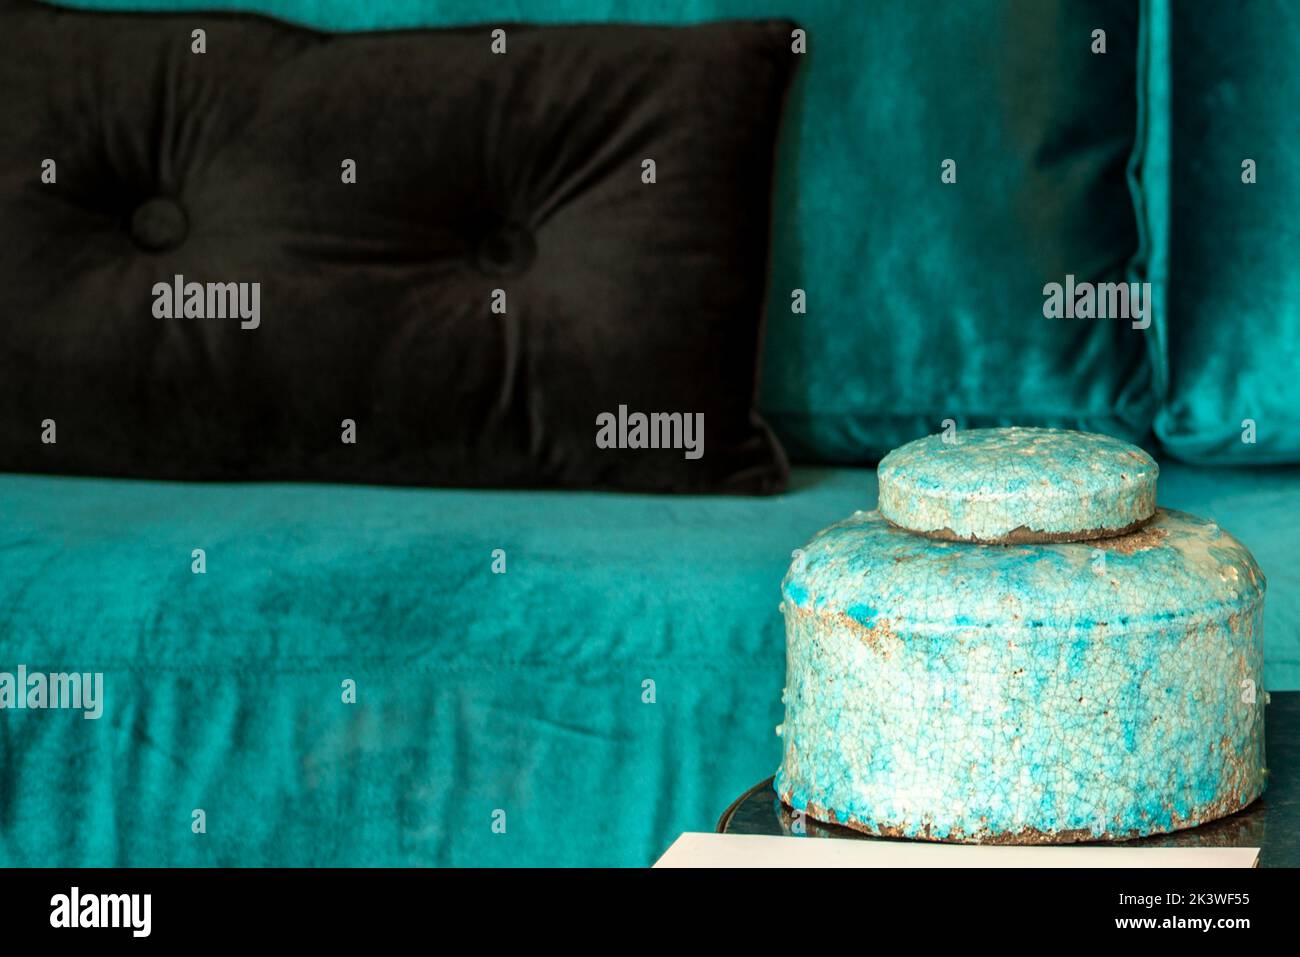 Detail of a living room with a decorative blue bowl and matching velvet sofa Stock Photo